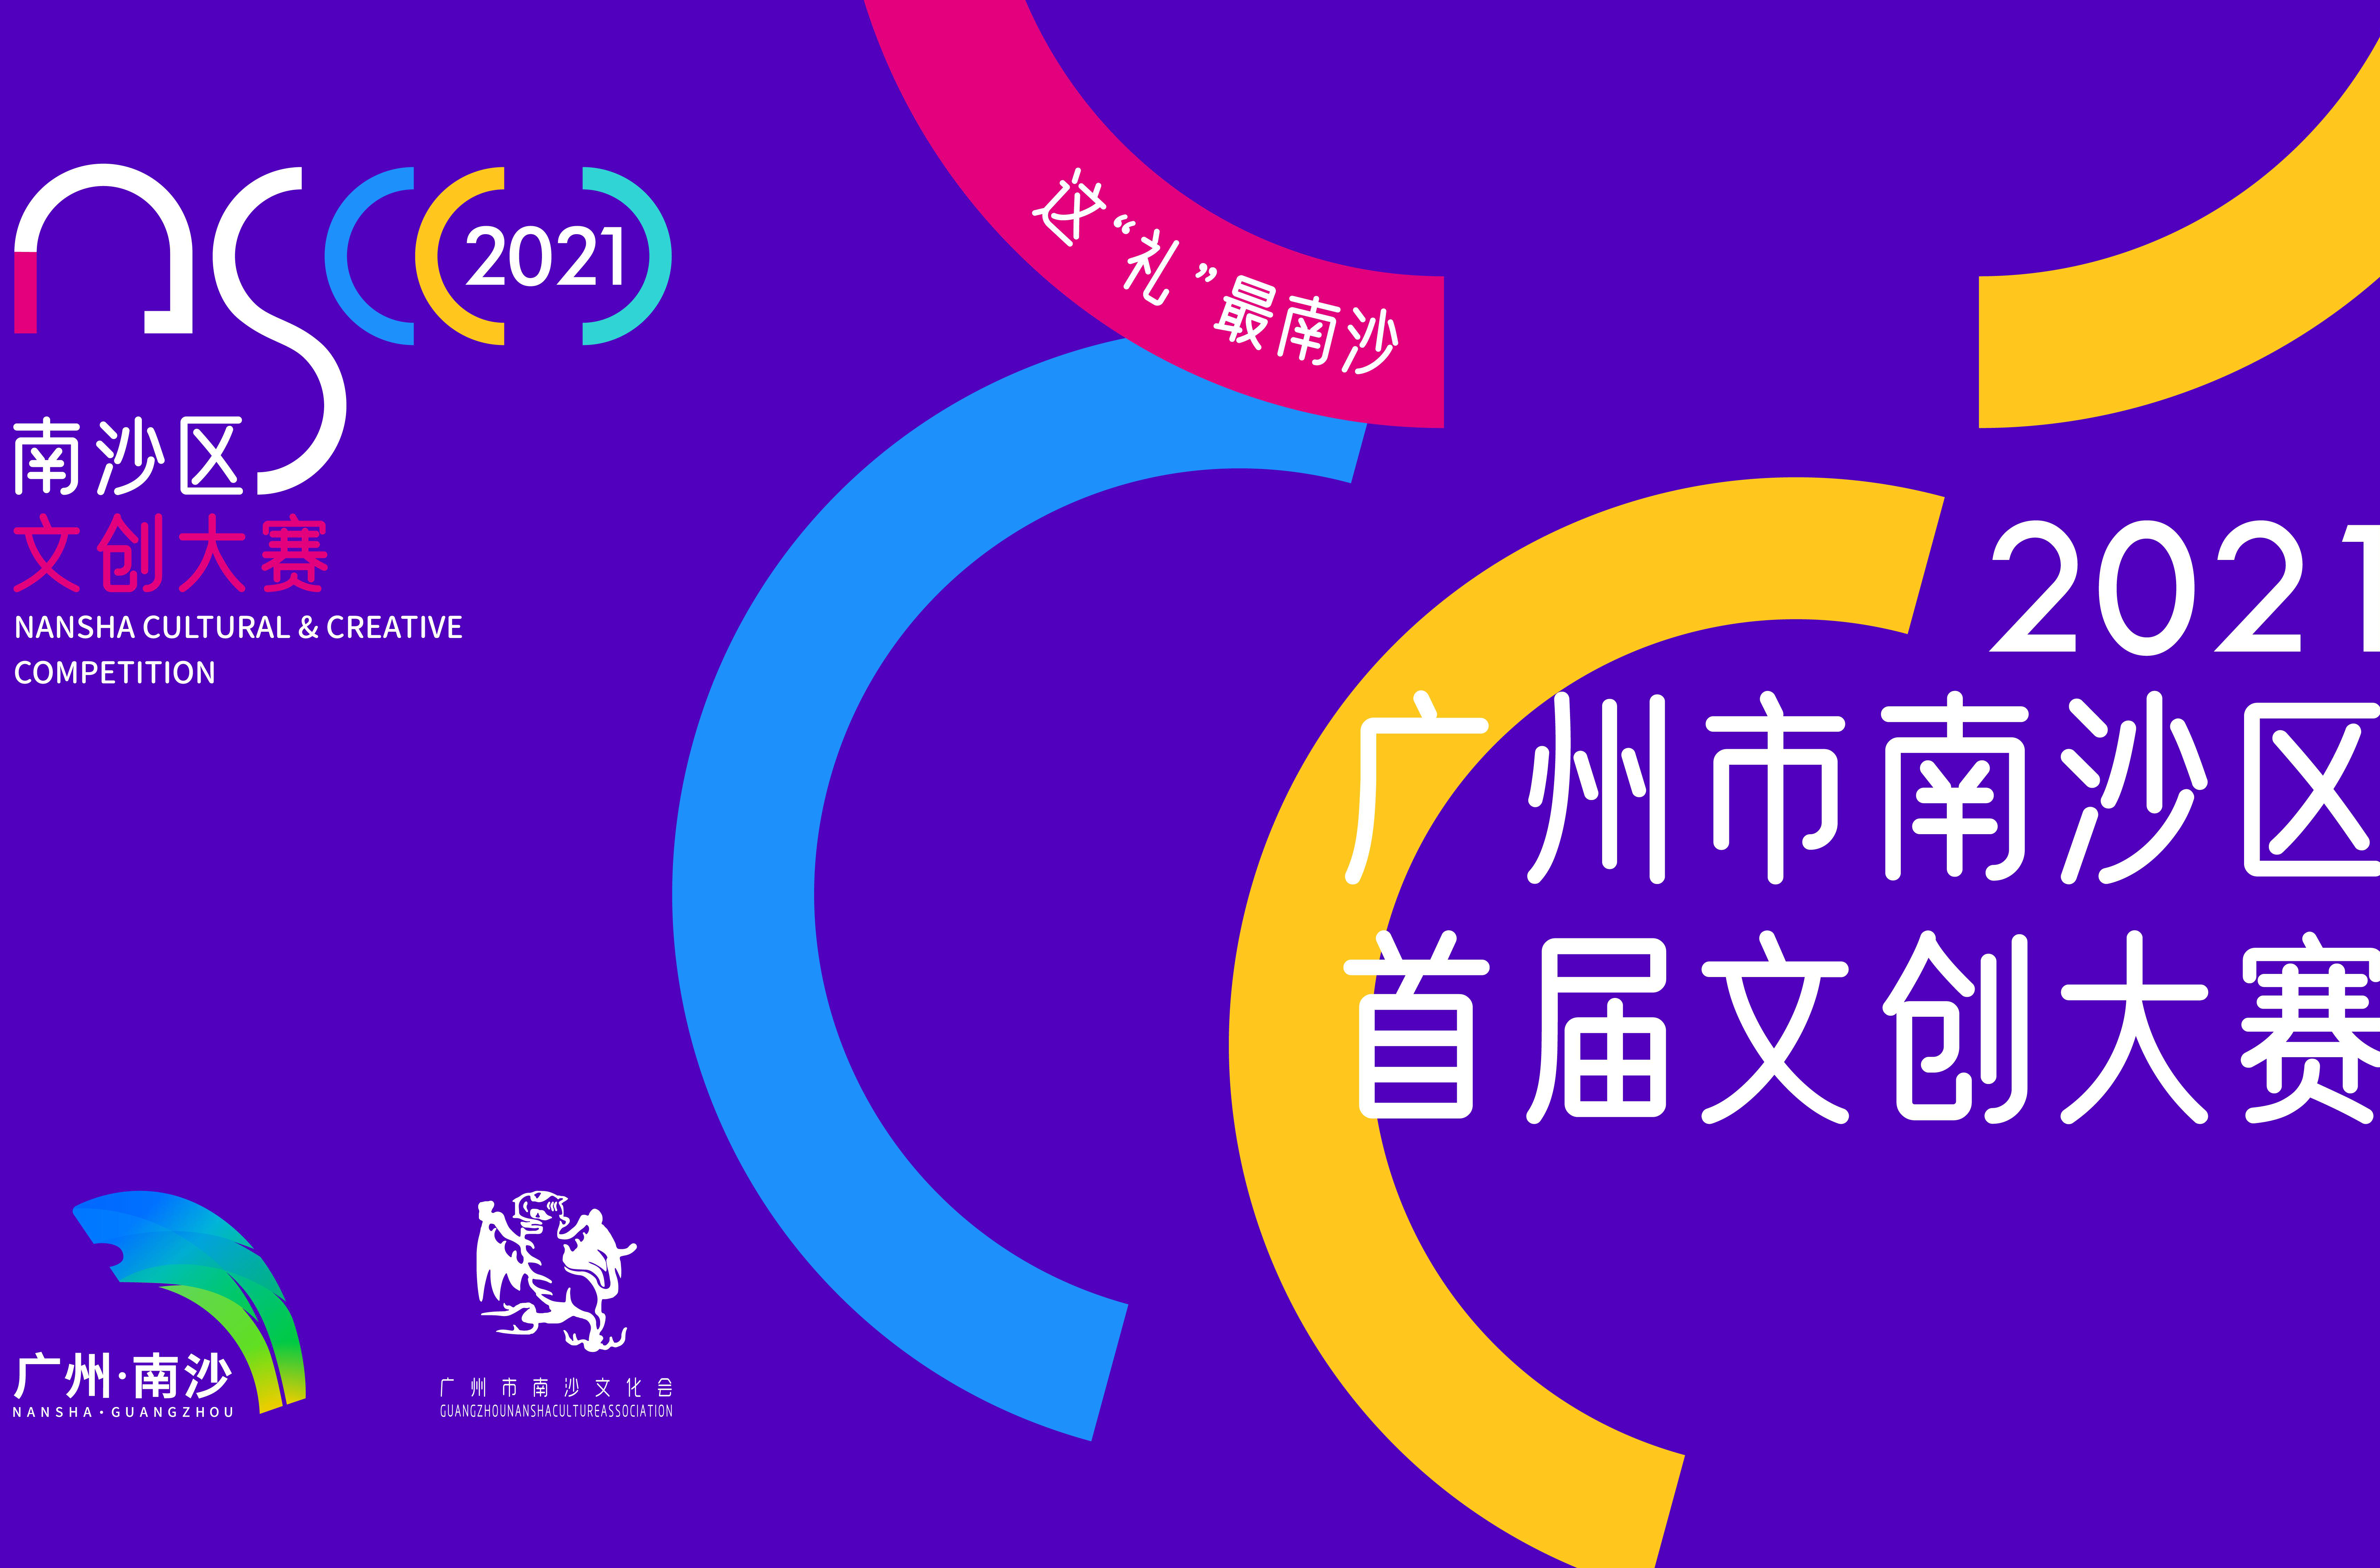 THE 2021 NANSHA CULTURAL & CREATIVE COMPETITION is Officially Launched